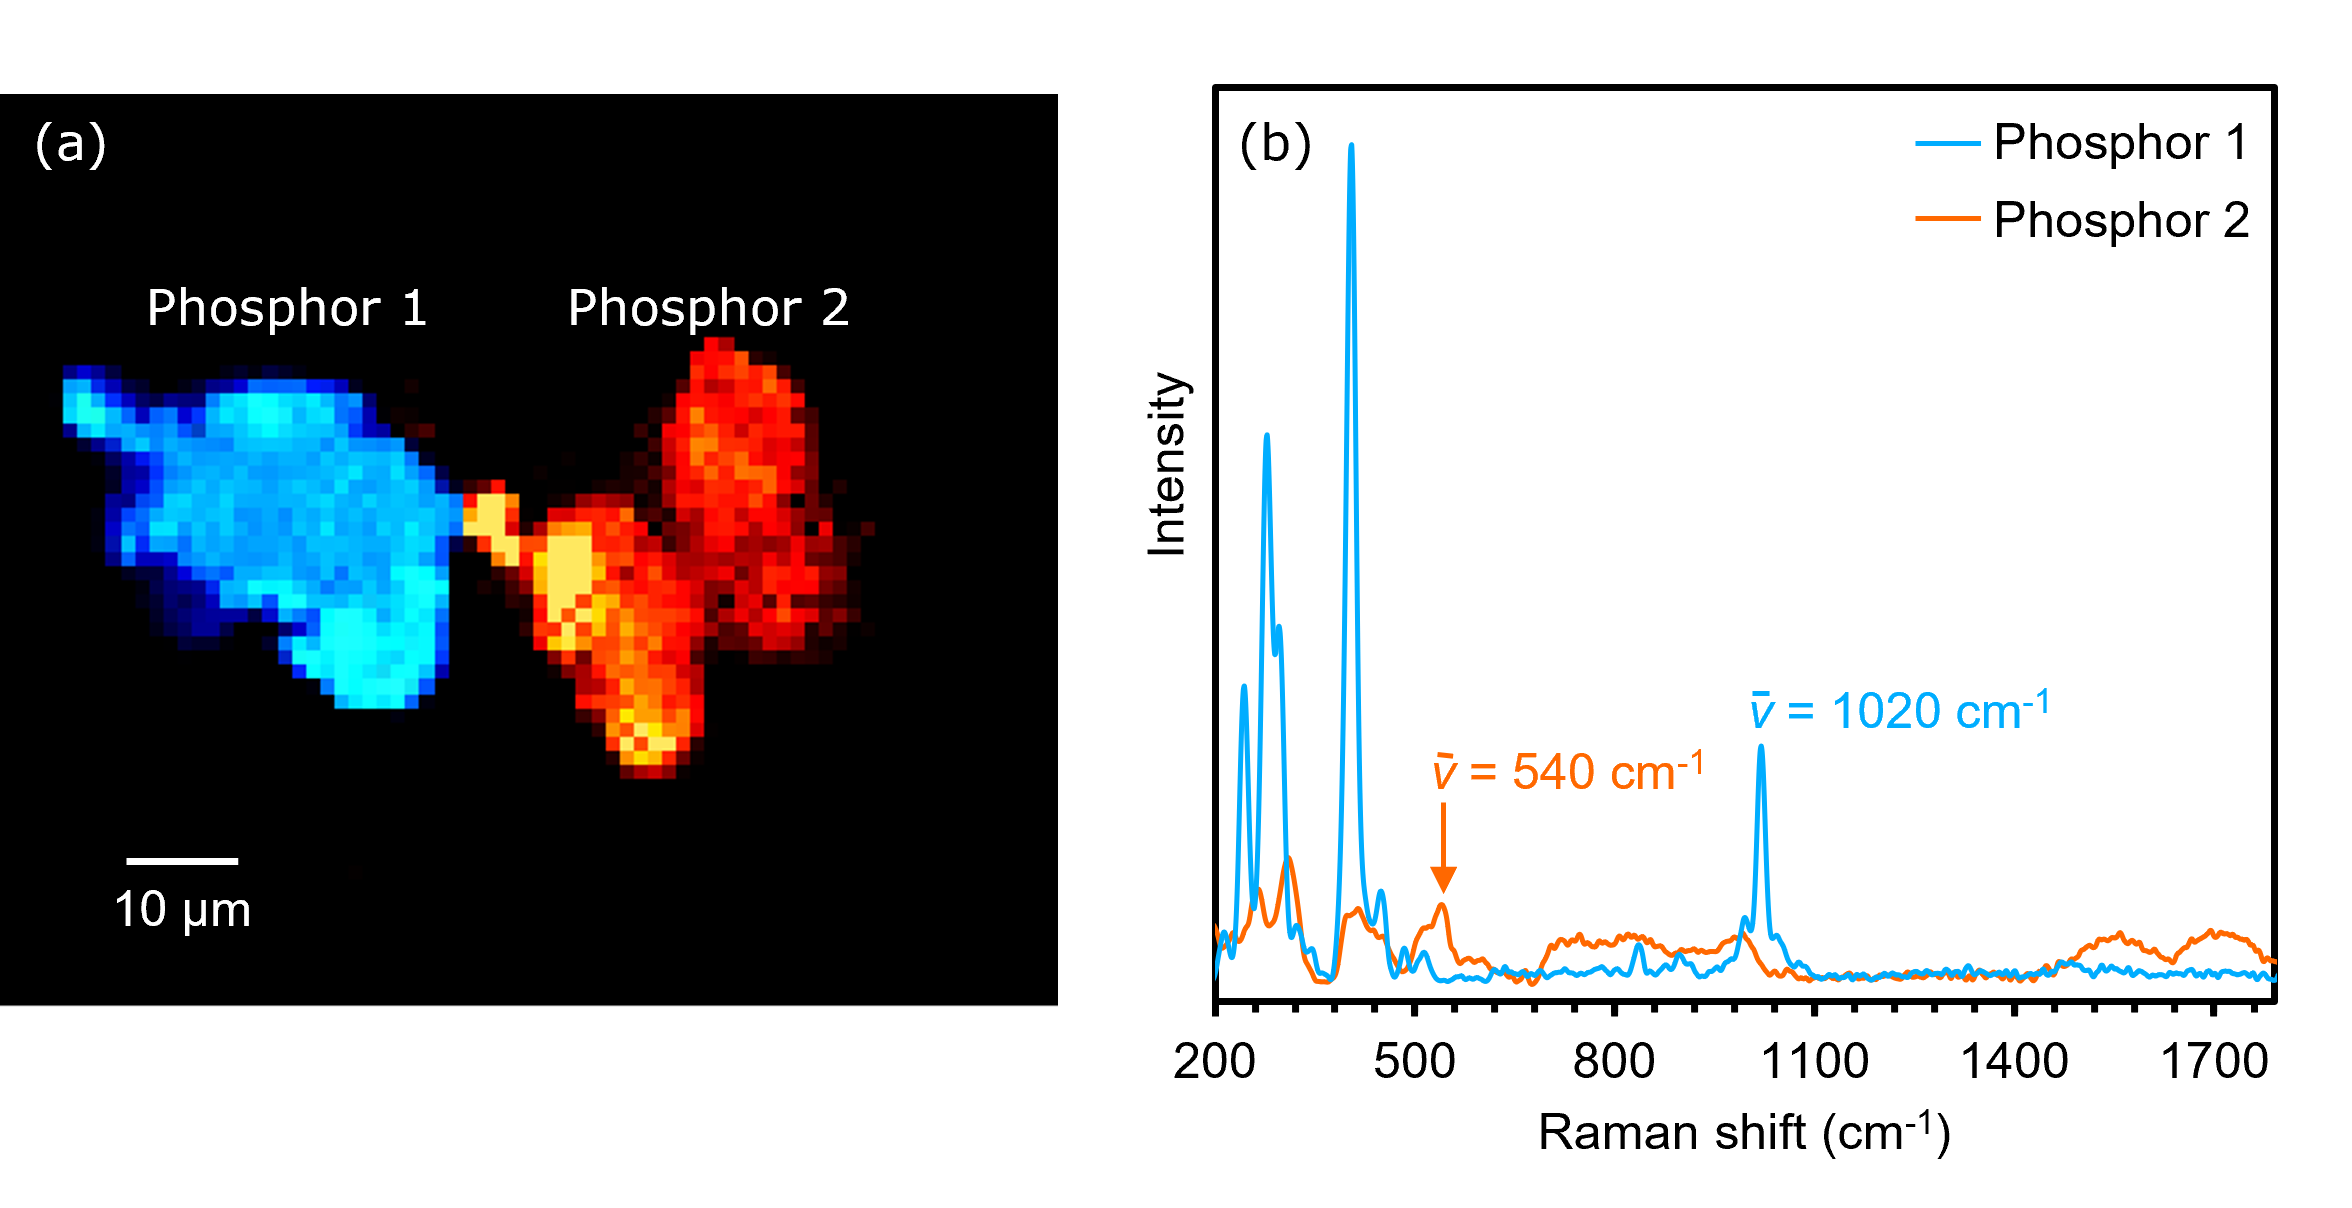 Raman image and spectra of phosphors 1 and 2.